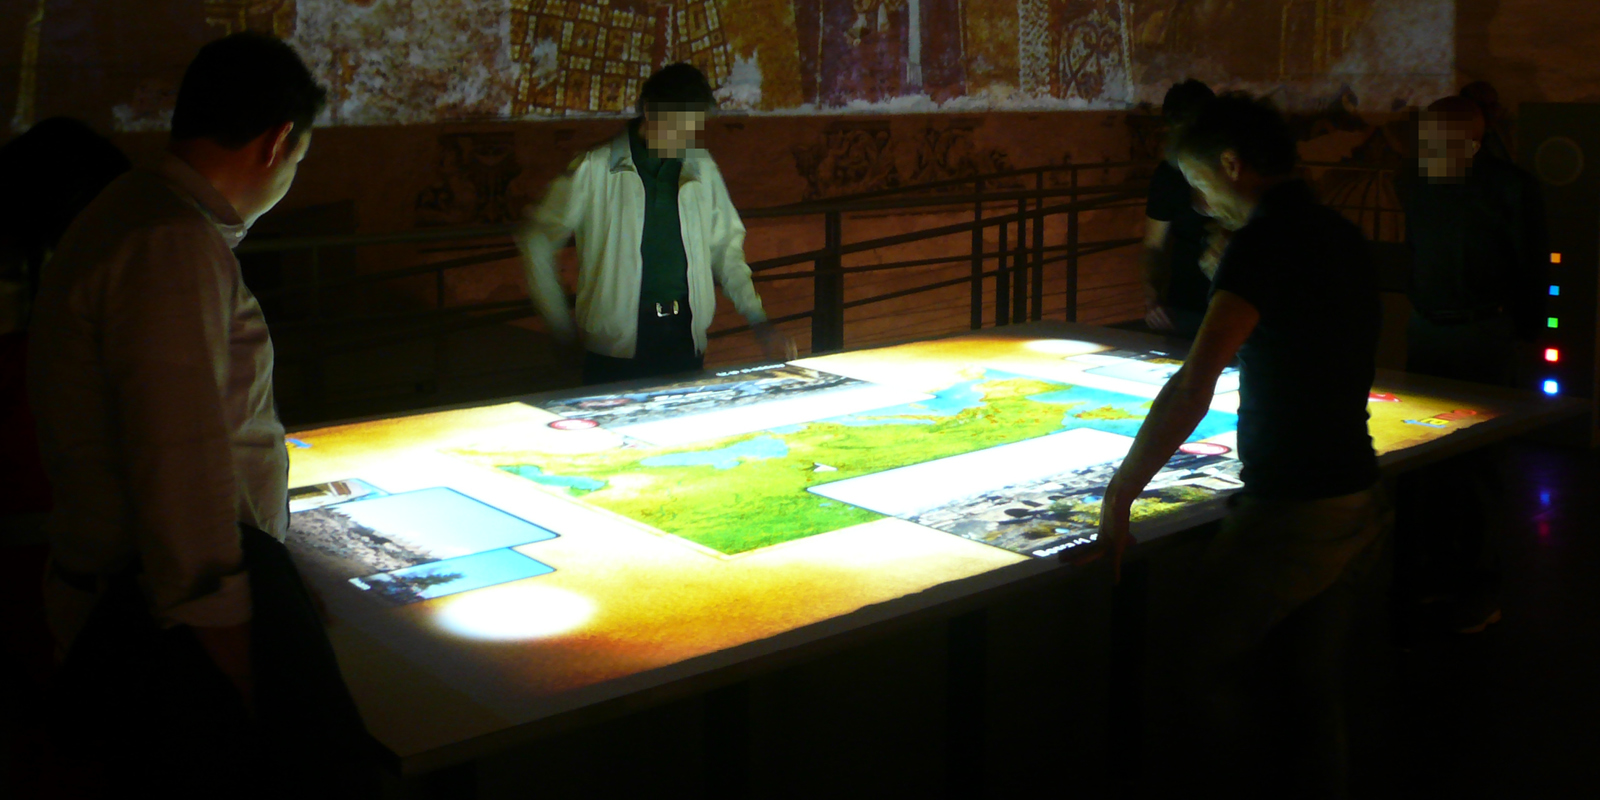 Touchwindow - Tamo, an exciting journey into the mosaic art